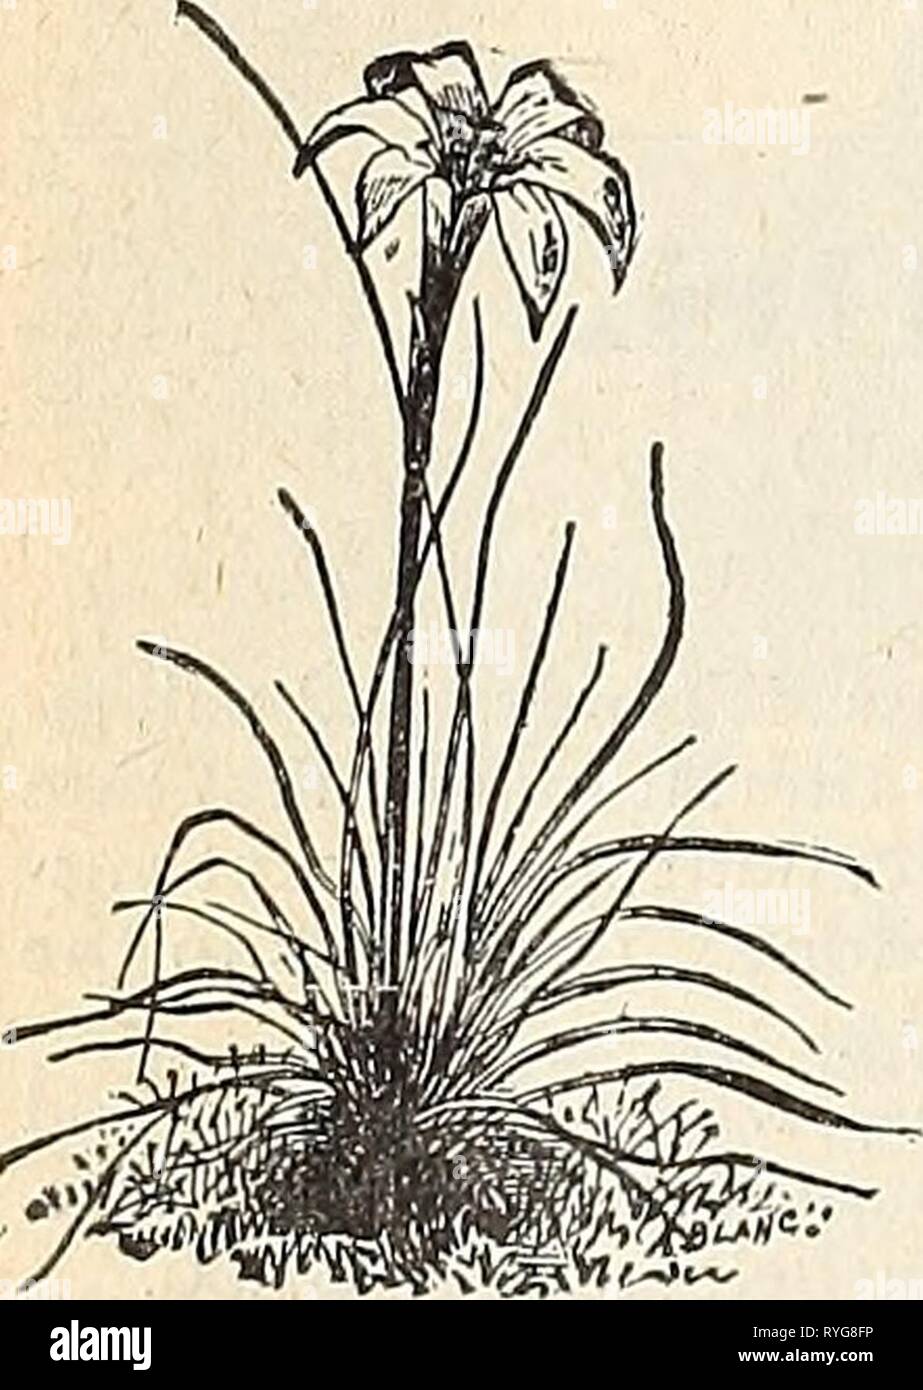 E. H. Hunt : seedsman  ehhuntseedsman1894hunt Year: 1894  SUMMER FLOWERING BULBS AND PLANTS. The Summer-flower- ing Bulbs and Roots for spring- planting' are in- expensive, very easily grown, require scarcely any care, and [)roduce some of ihe most showy and beautiful of all summer and autumn flowtrs. There are but few flowers that can compare with the bril- liant spikes of the Glad- iolus or flowers of the Dahlia, the elegance of the Lily, the purity and fragrance of the Tube- rose, the stately Can- nas, the tropical foliag-e of the Caladium or the flaming heads of the Tritoma. Before hard fr Stock Photo